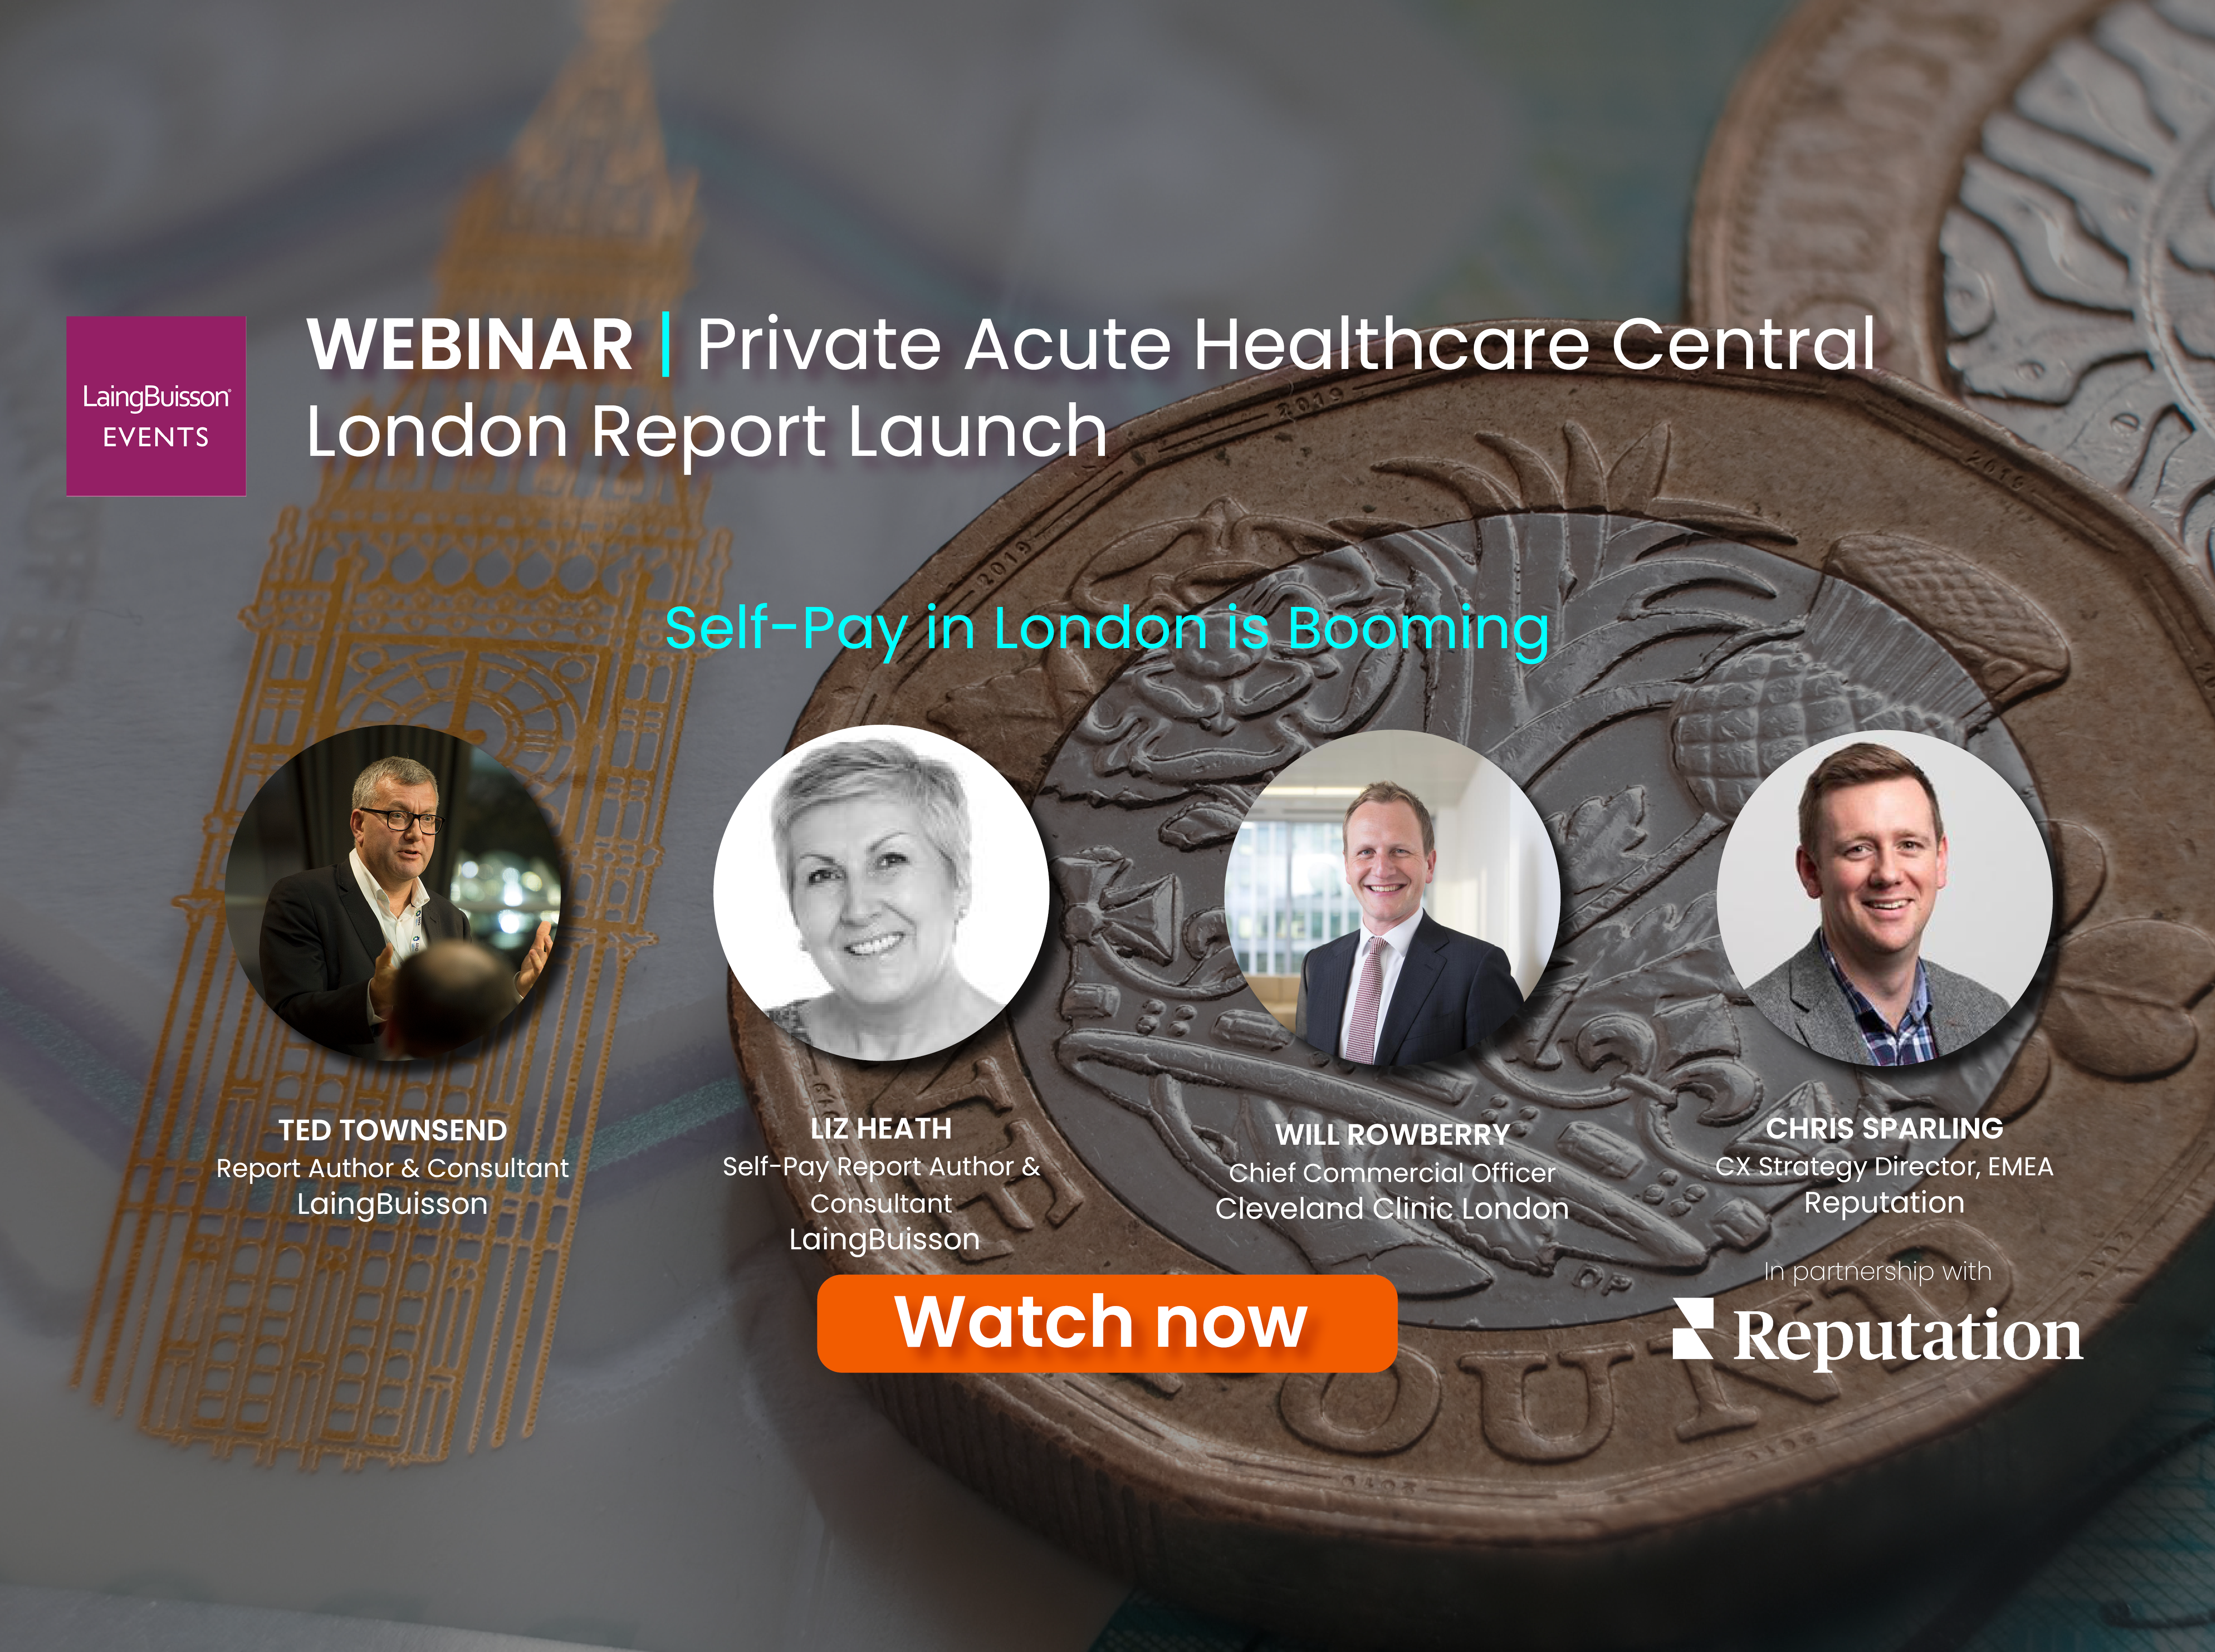 Graphic depicting the panel participating in the Private Acute Healthcare Central London Market Report Launch webinar.